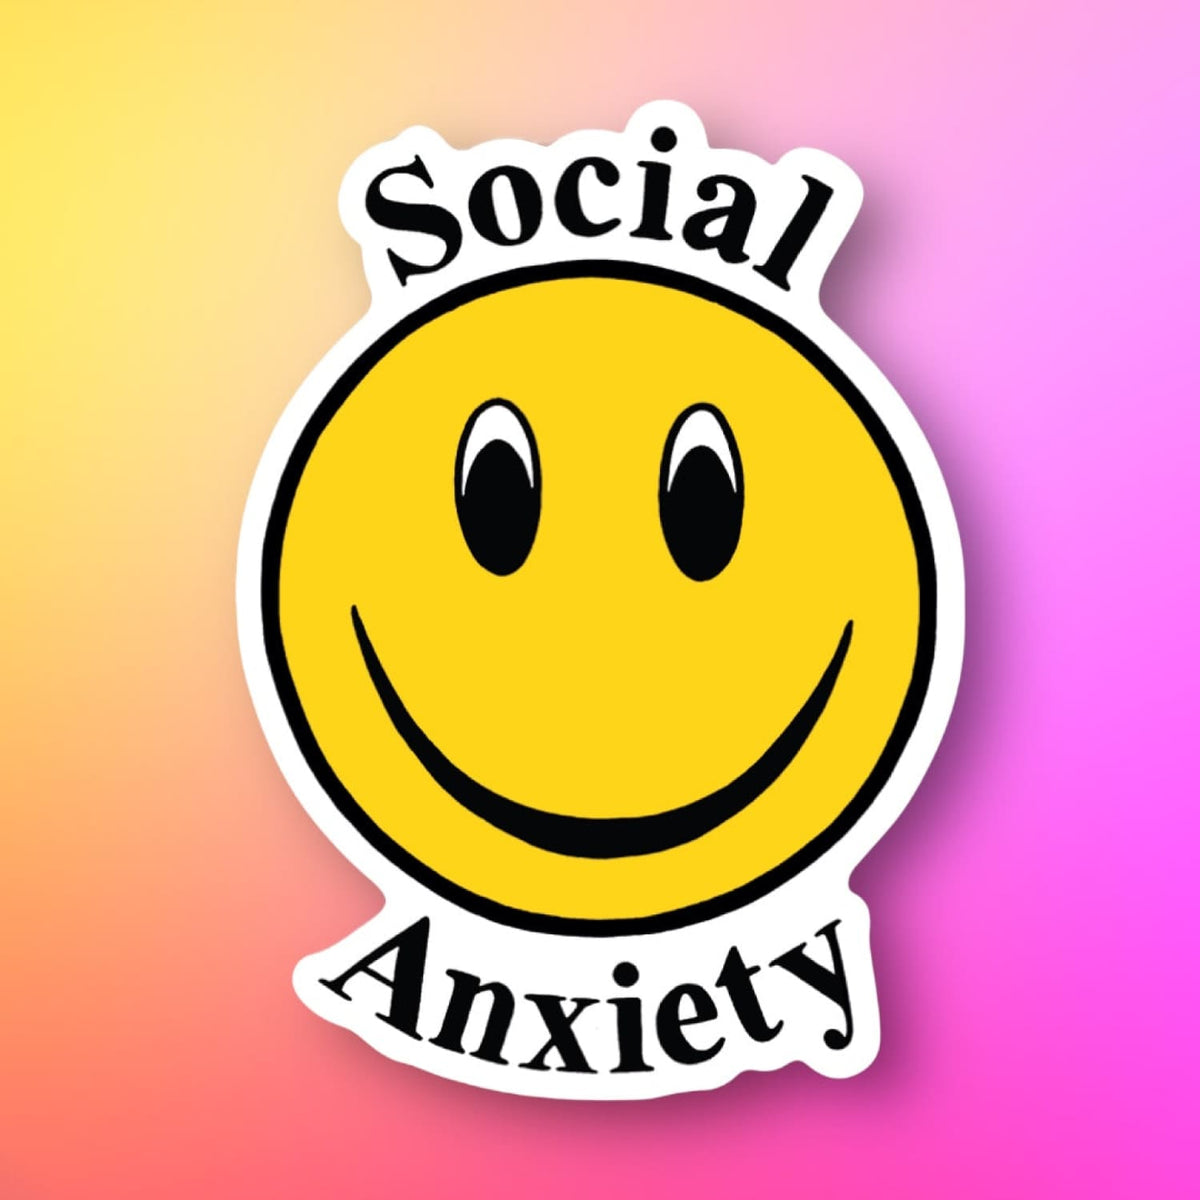 Social Anxiety Smiley Face Sticker 90s Baby - Anxiety -